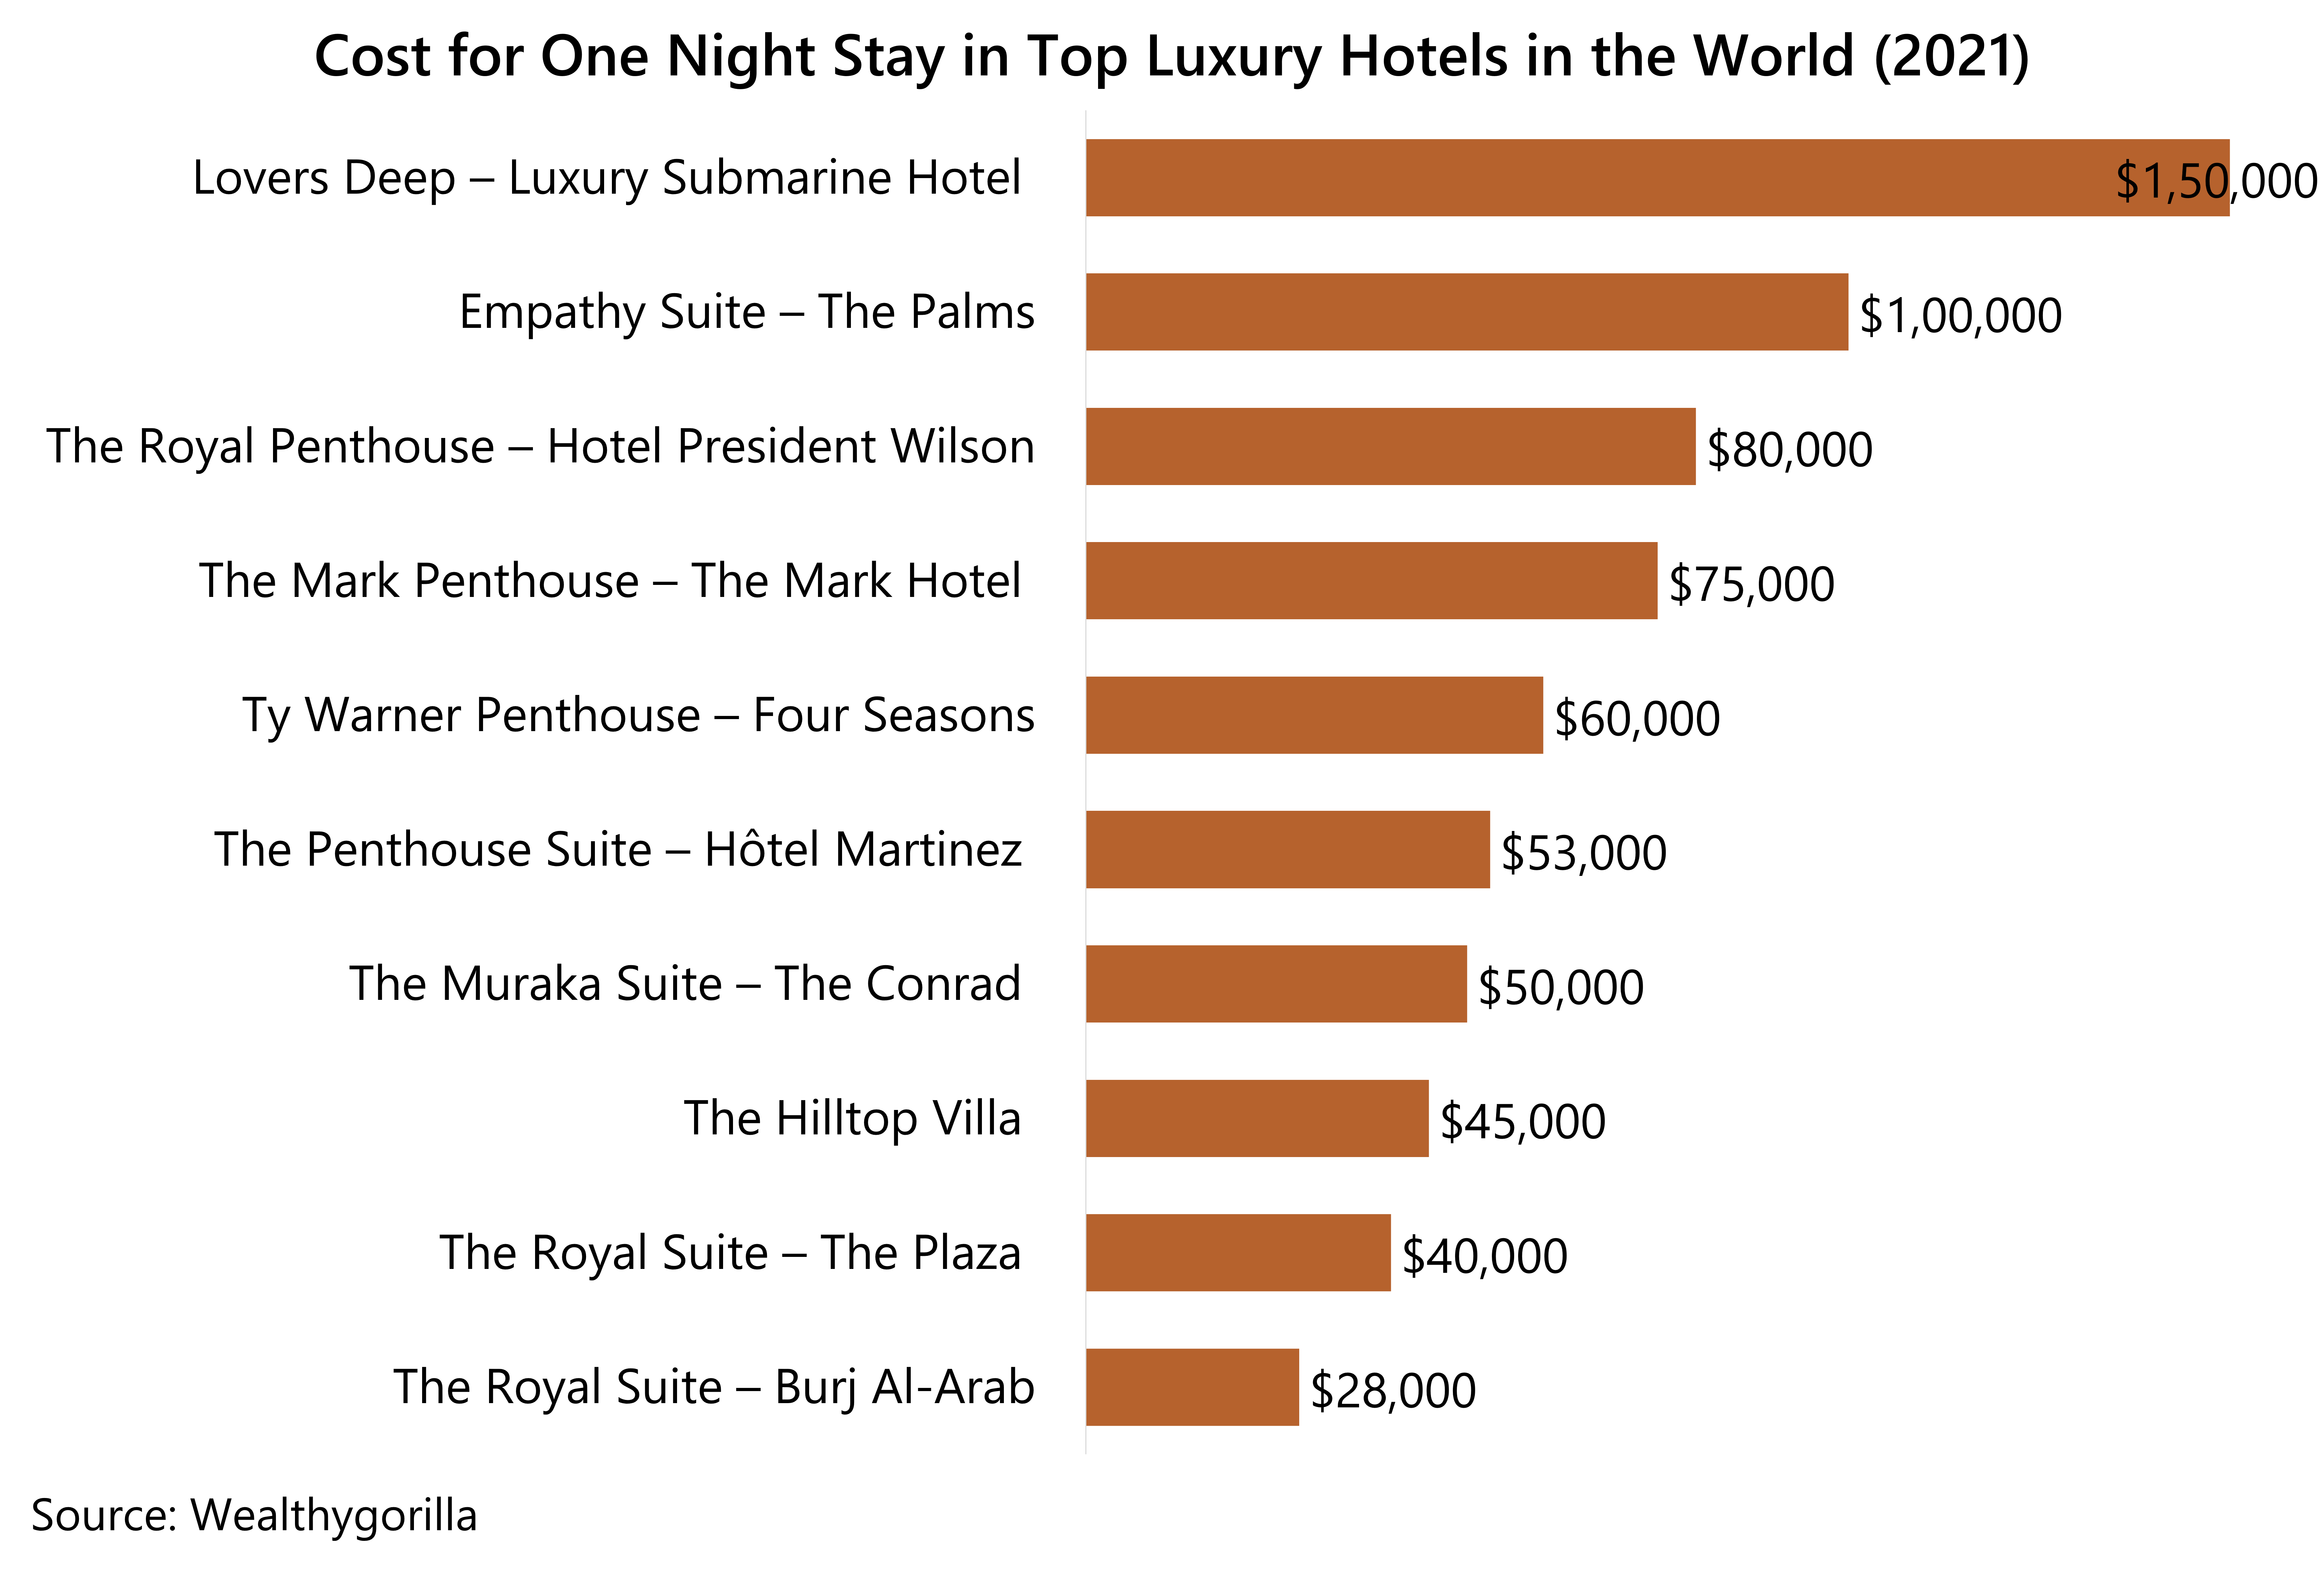 This chart shows the cost for a one night's stay at the top luxury hotels worldwide. 